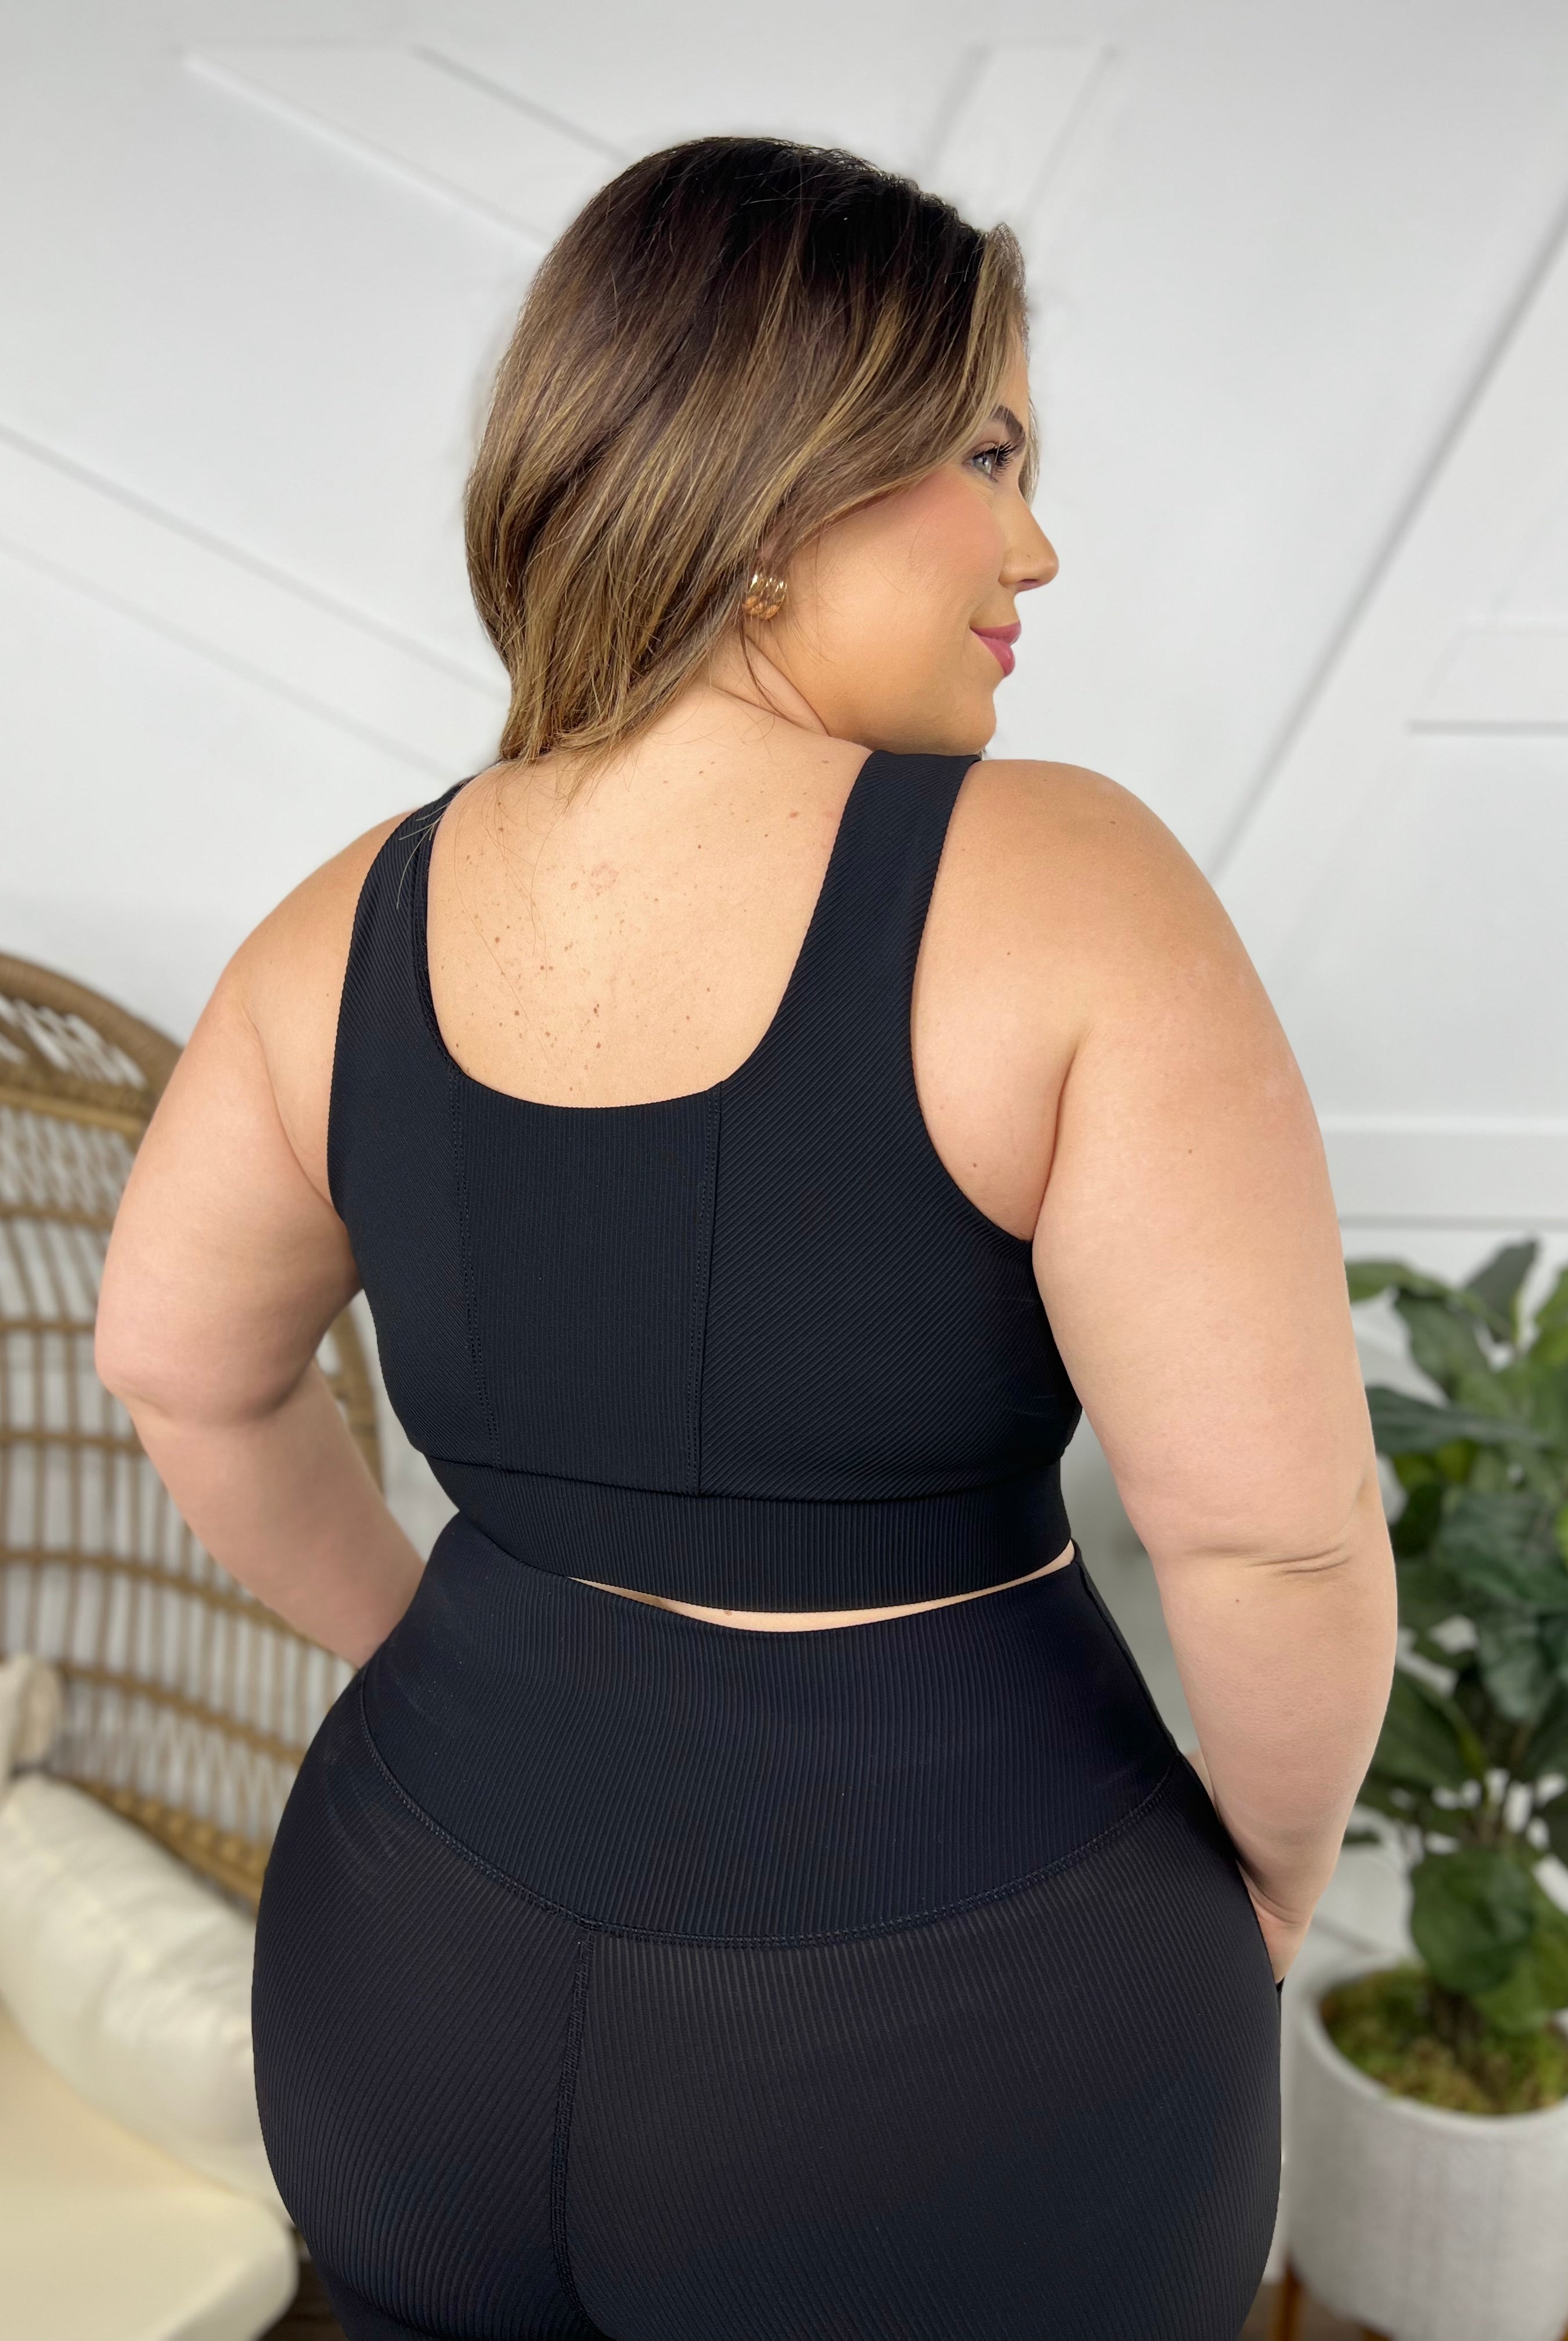 RESTOCK: Goal Maker Sports Bra-140 Body Suits/ Intimates-Rae Mode-Heathered Boho Boutique, Women's Fashion and Accessories in Palmetto, FL